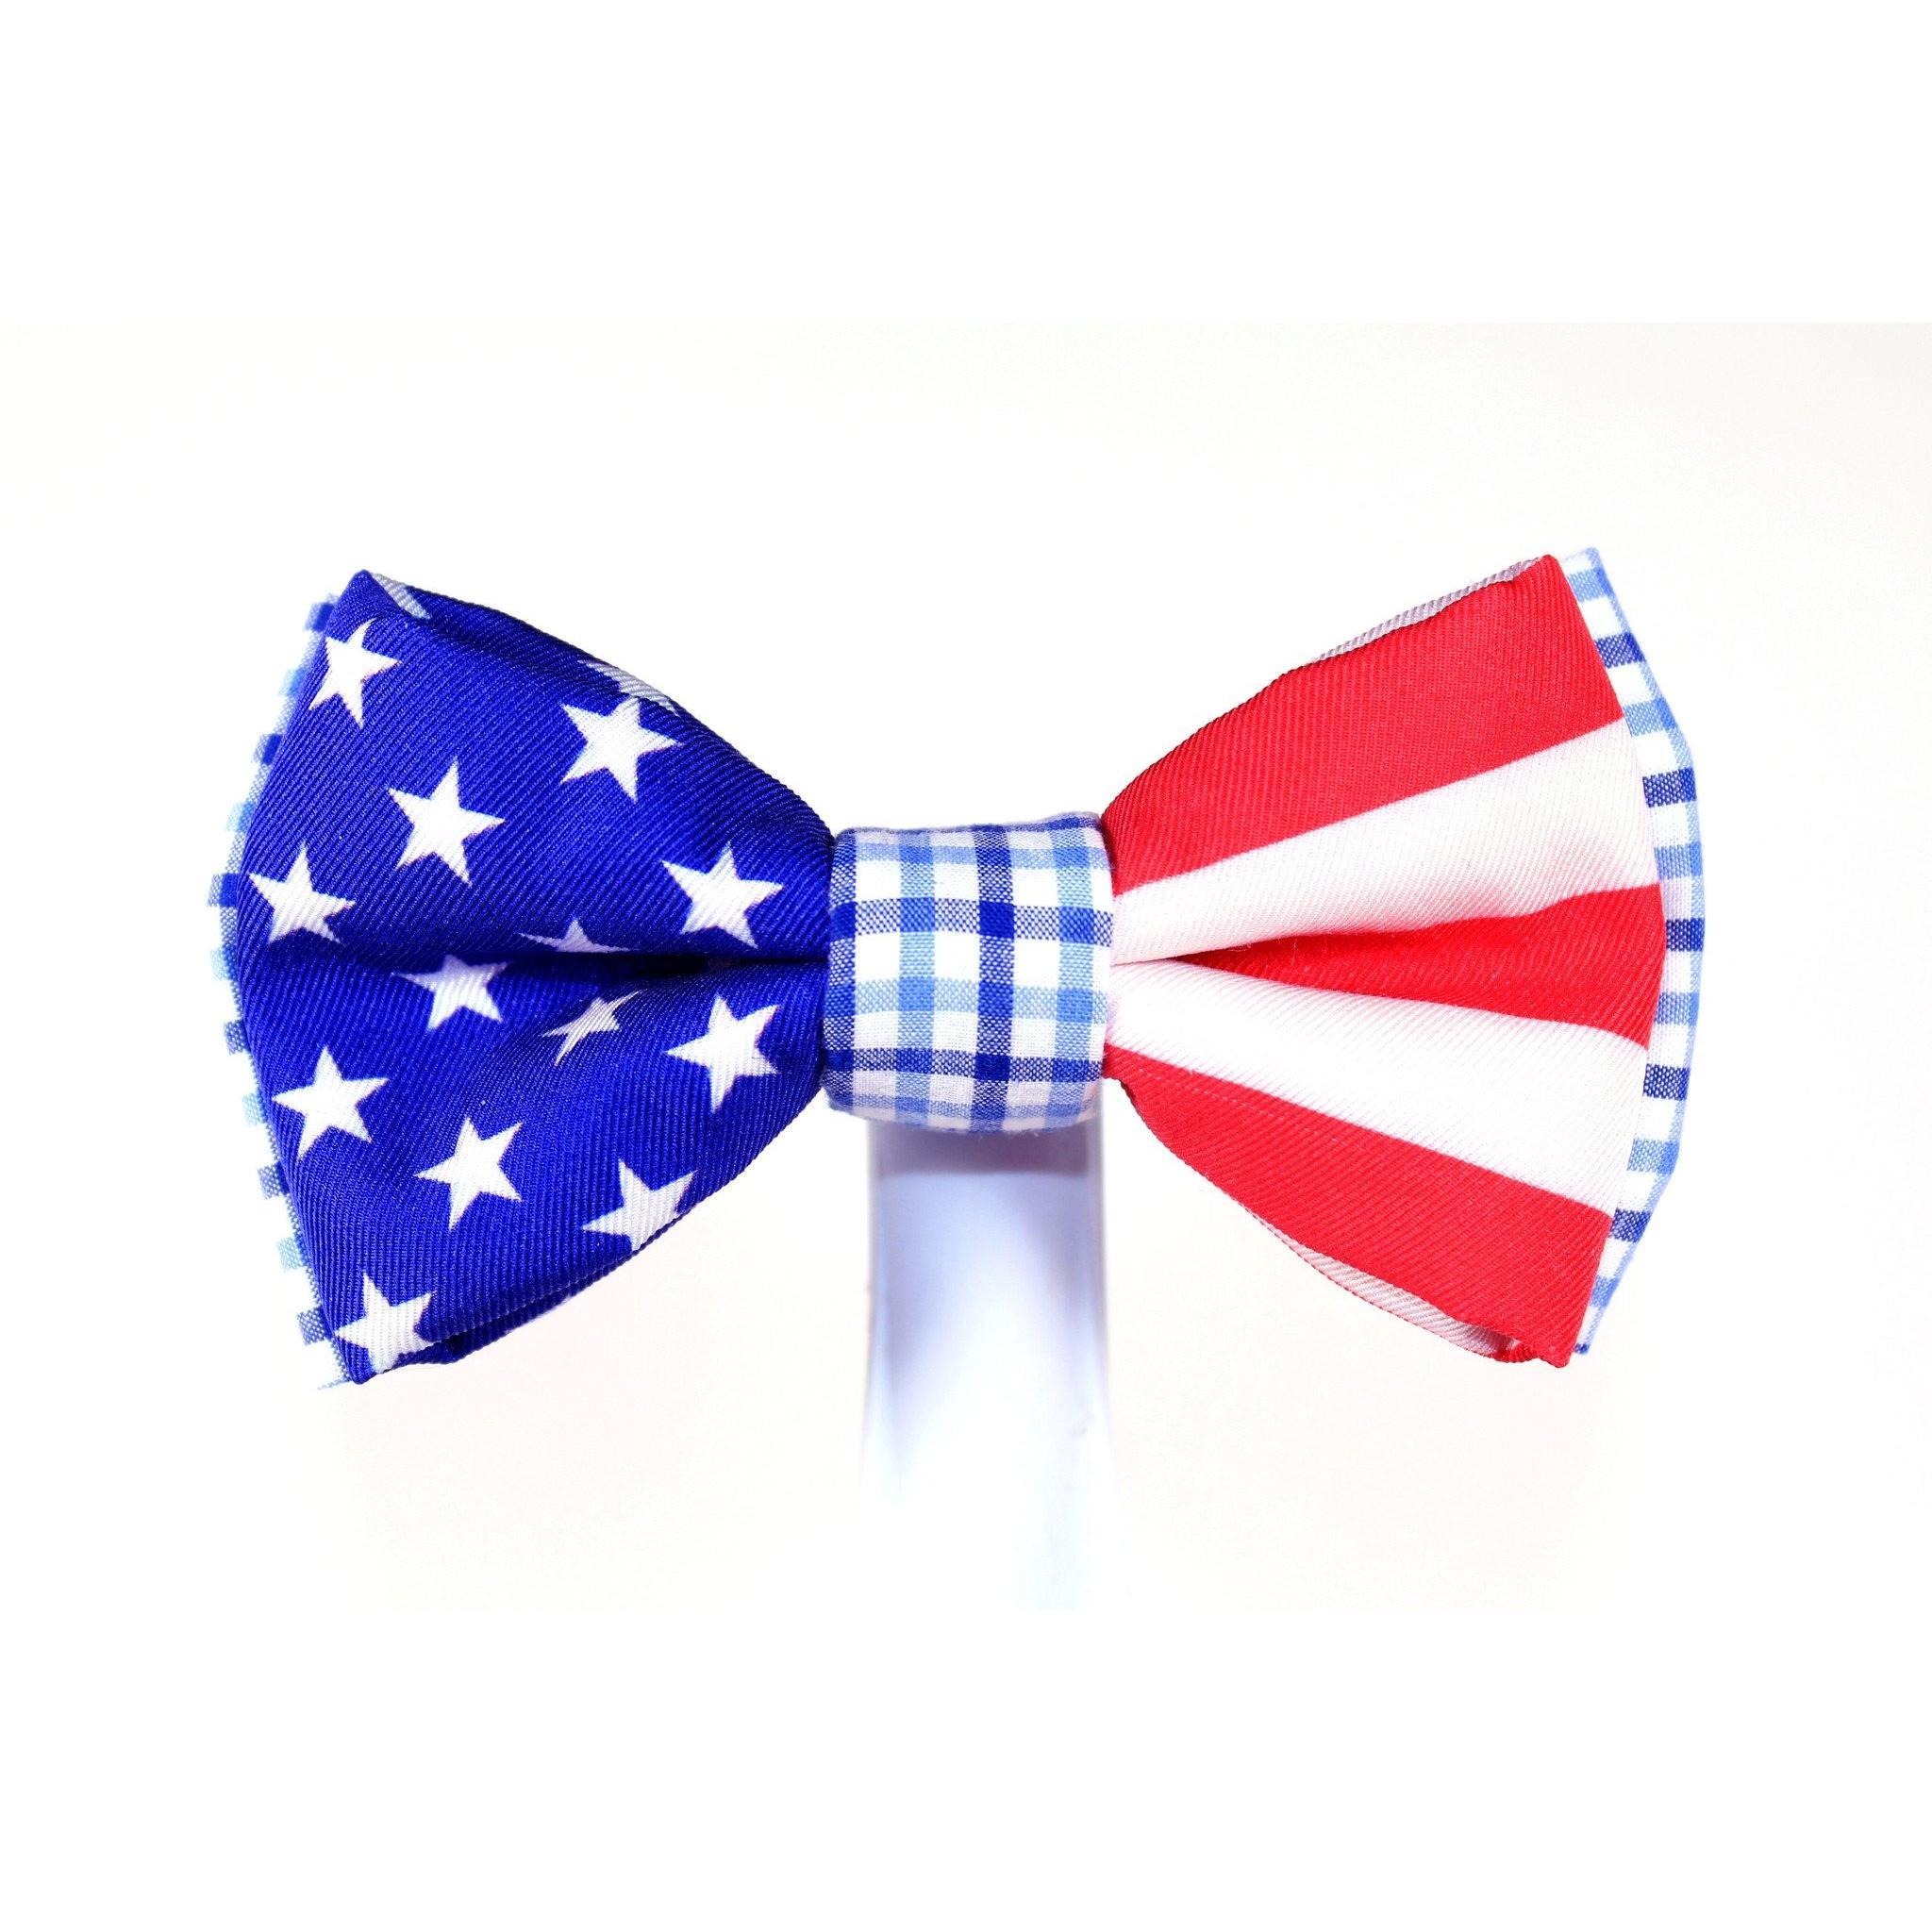 Brobows - Smart Close Magnetic Bow Ties